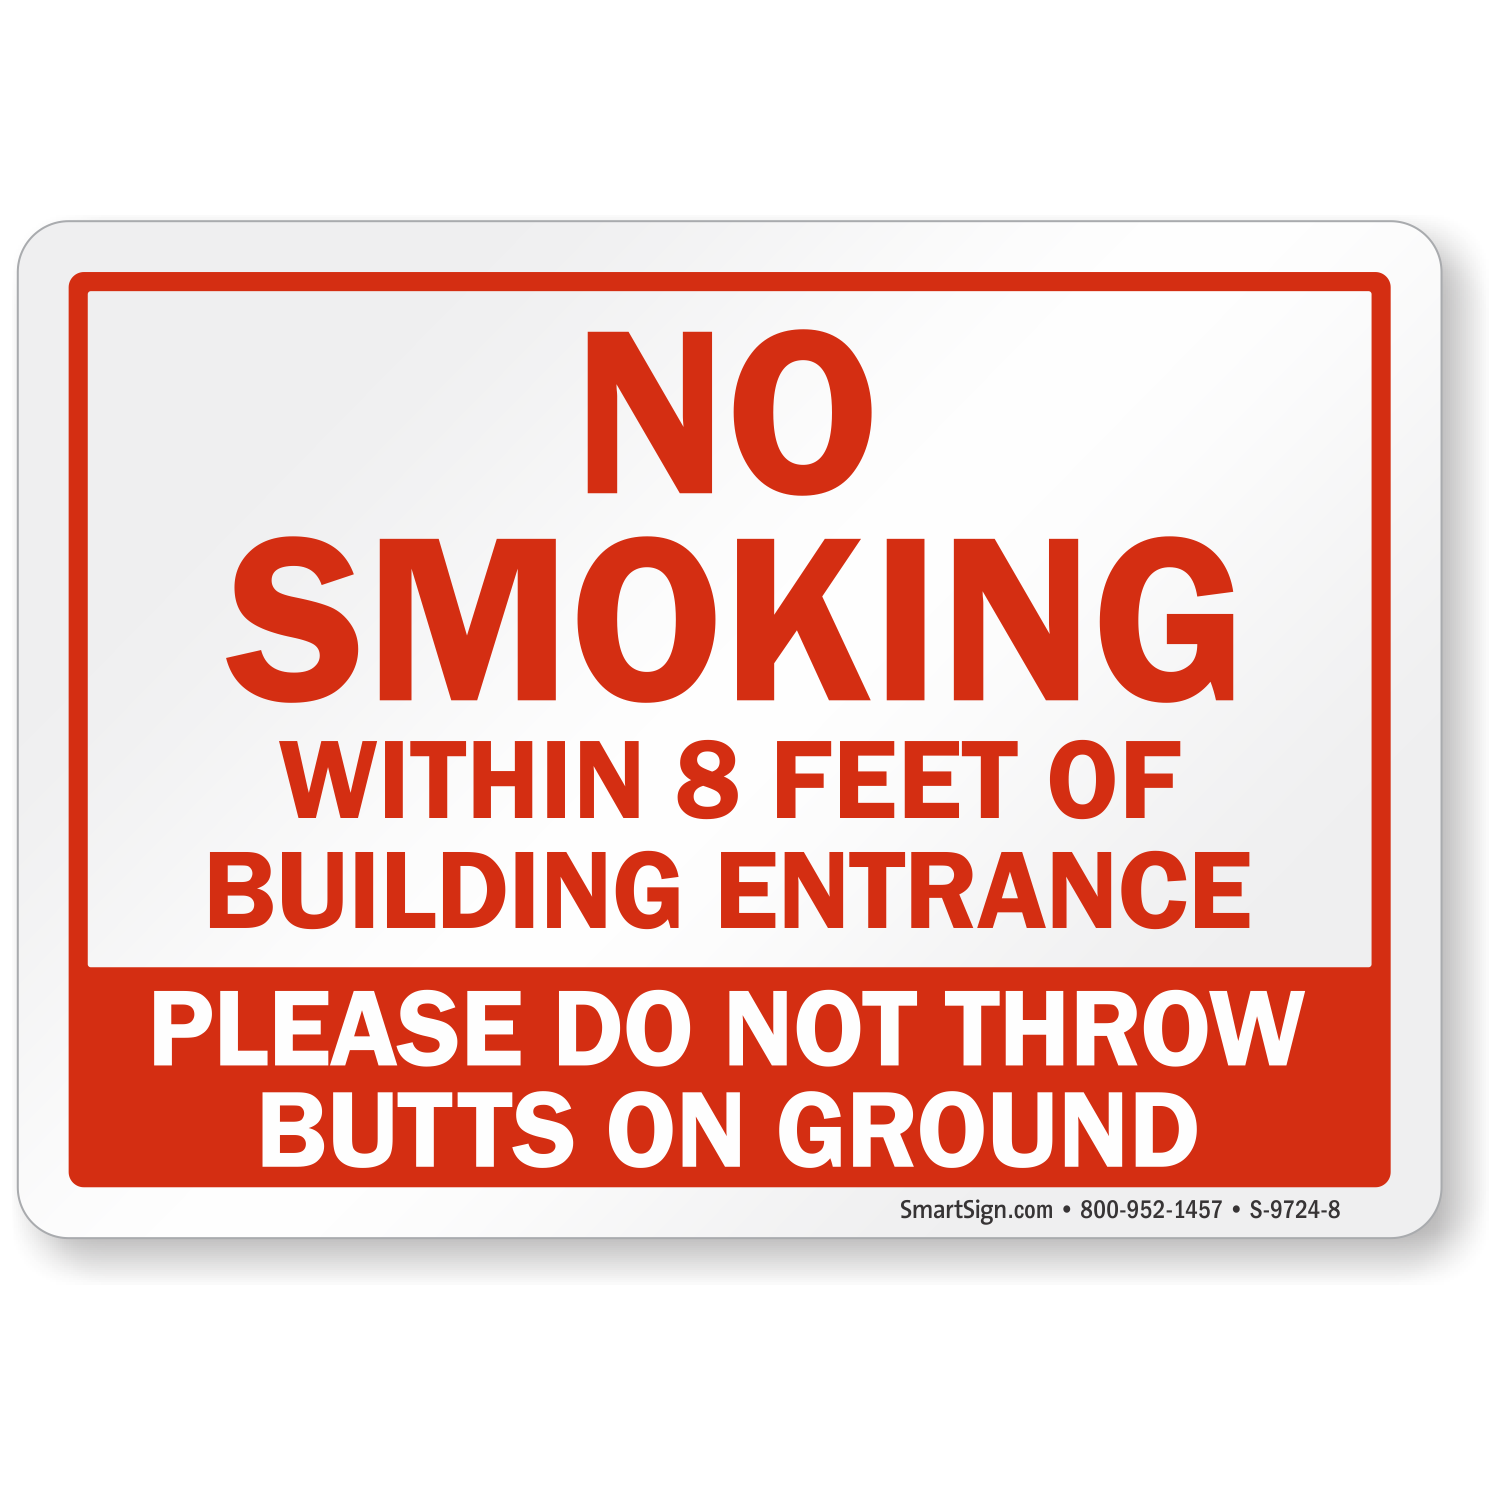 No Smoking Chalk Corner Double-Sided Weather-Resistant Yard Sign 18x12 CGSignLab 